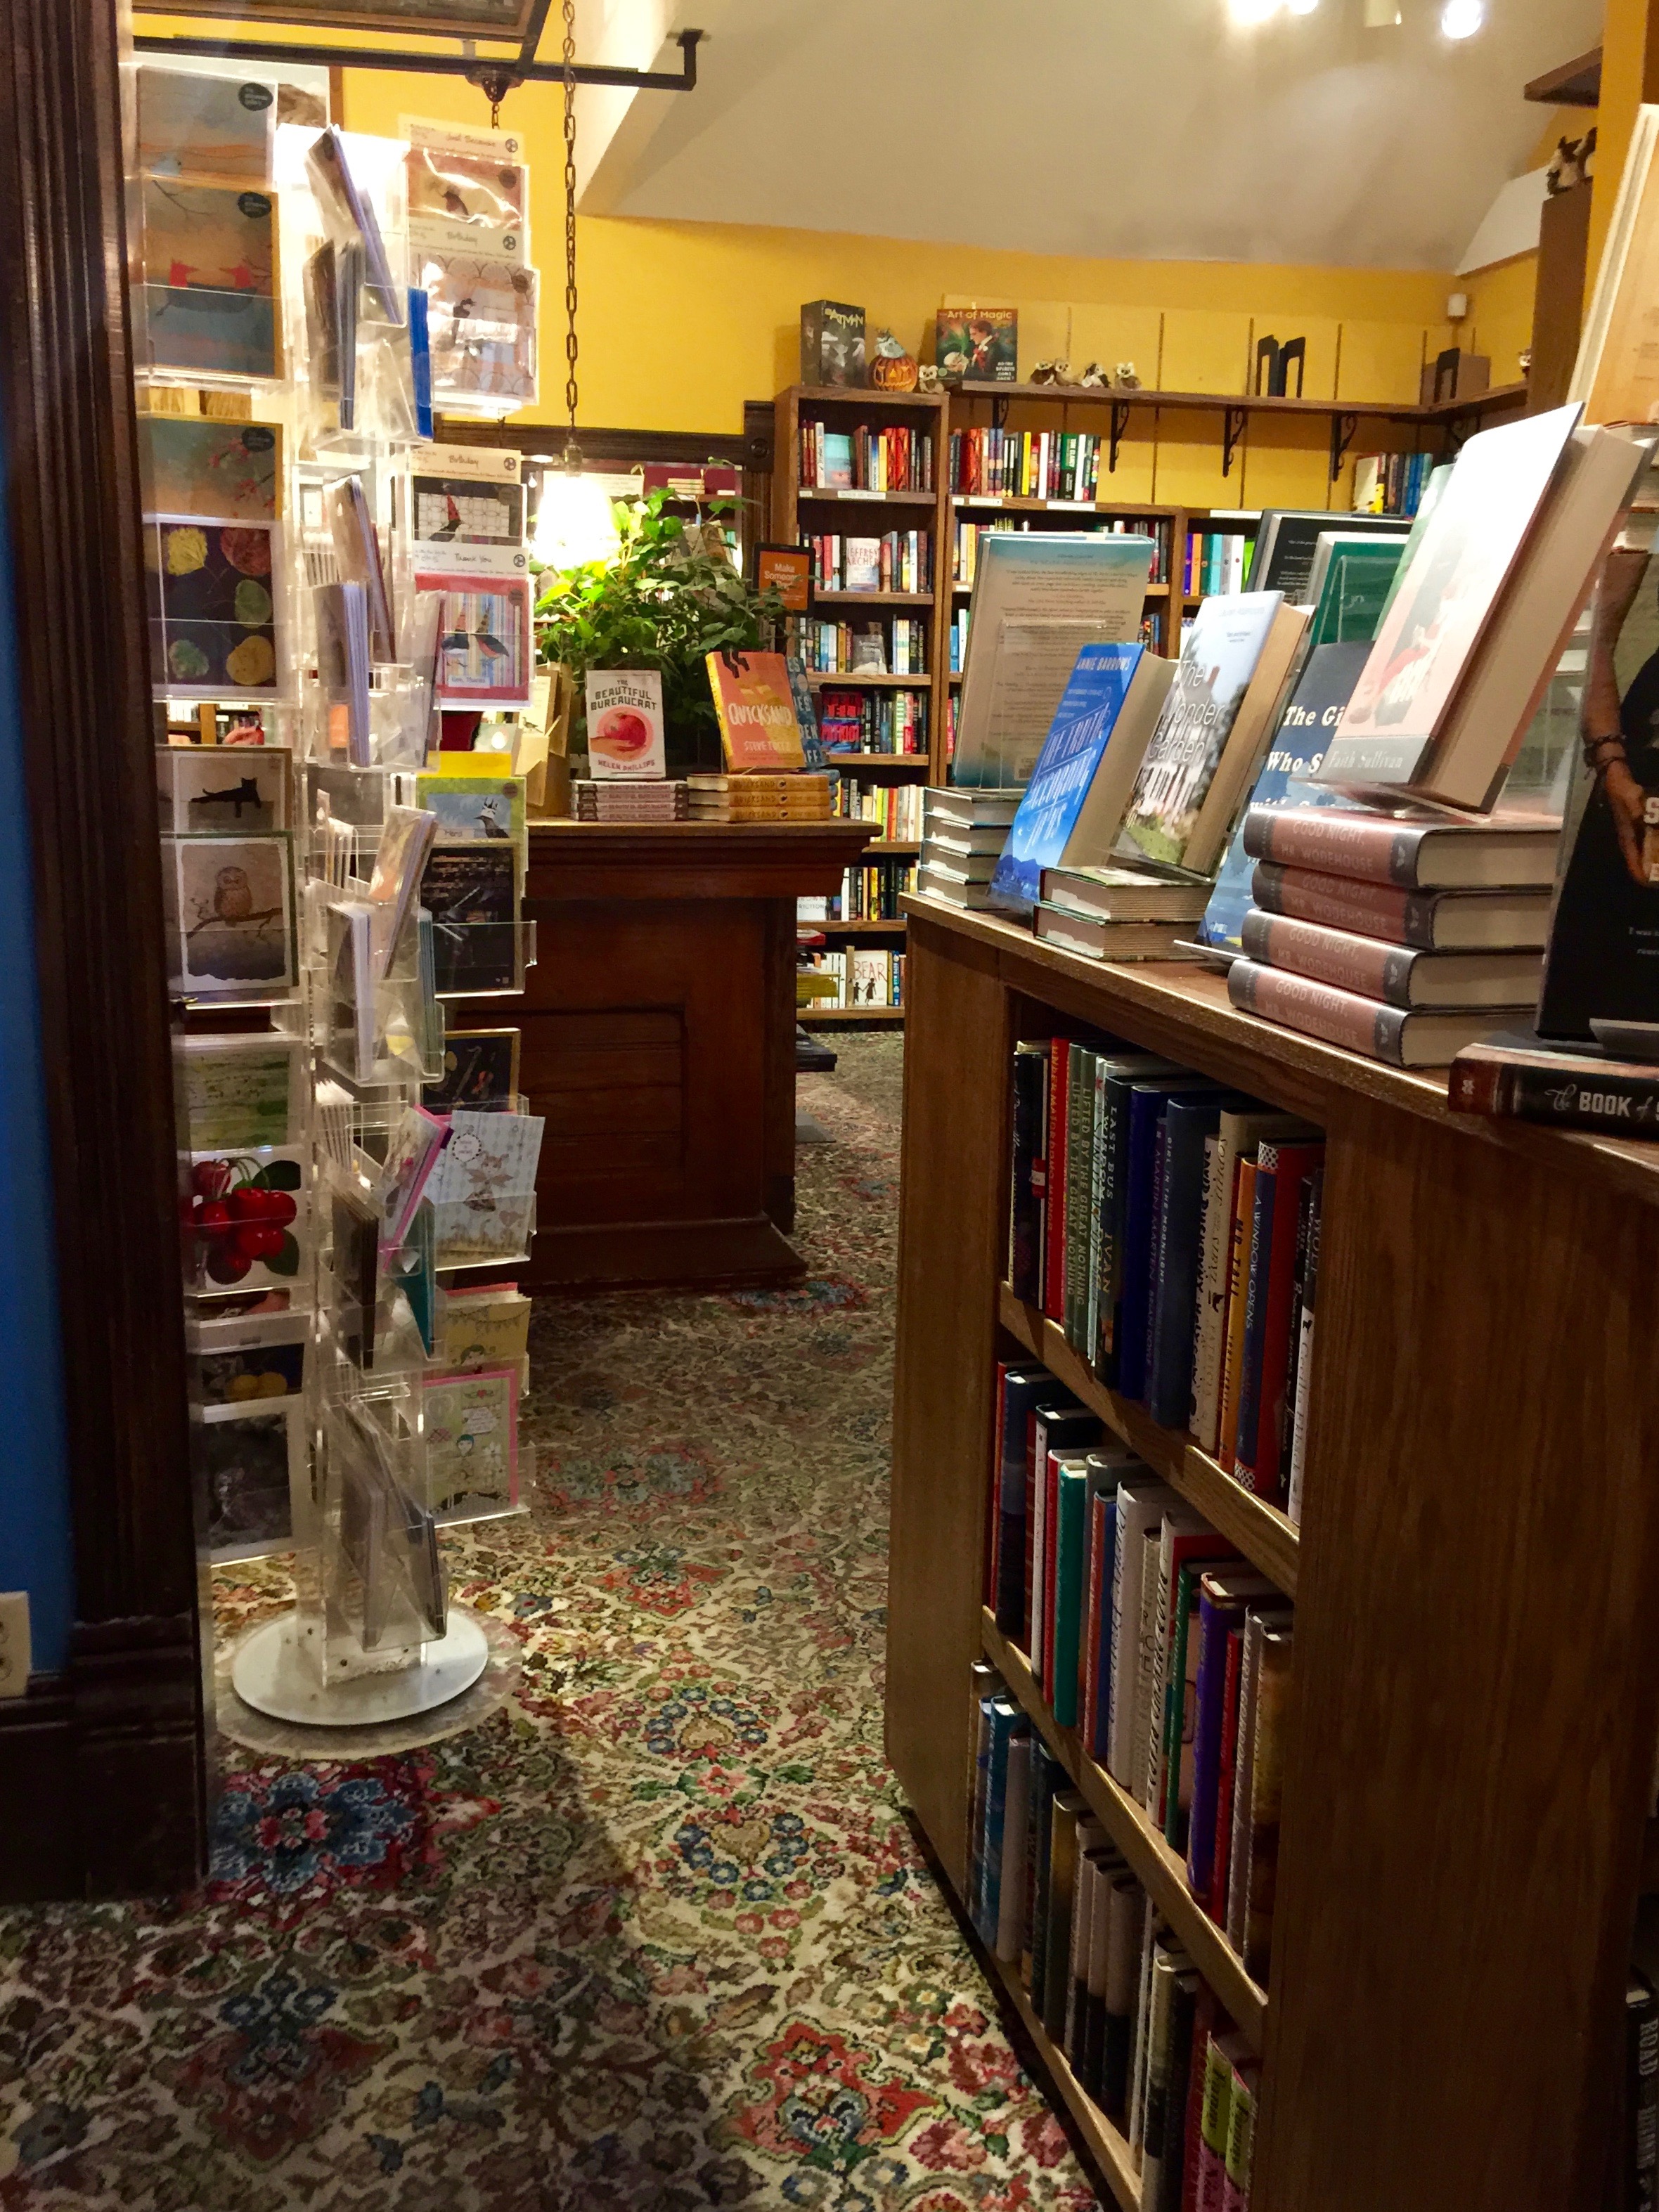 Explore Booksellers